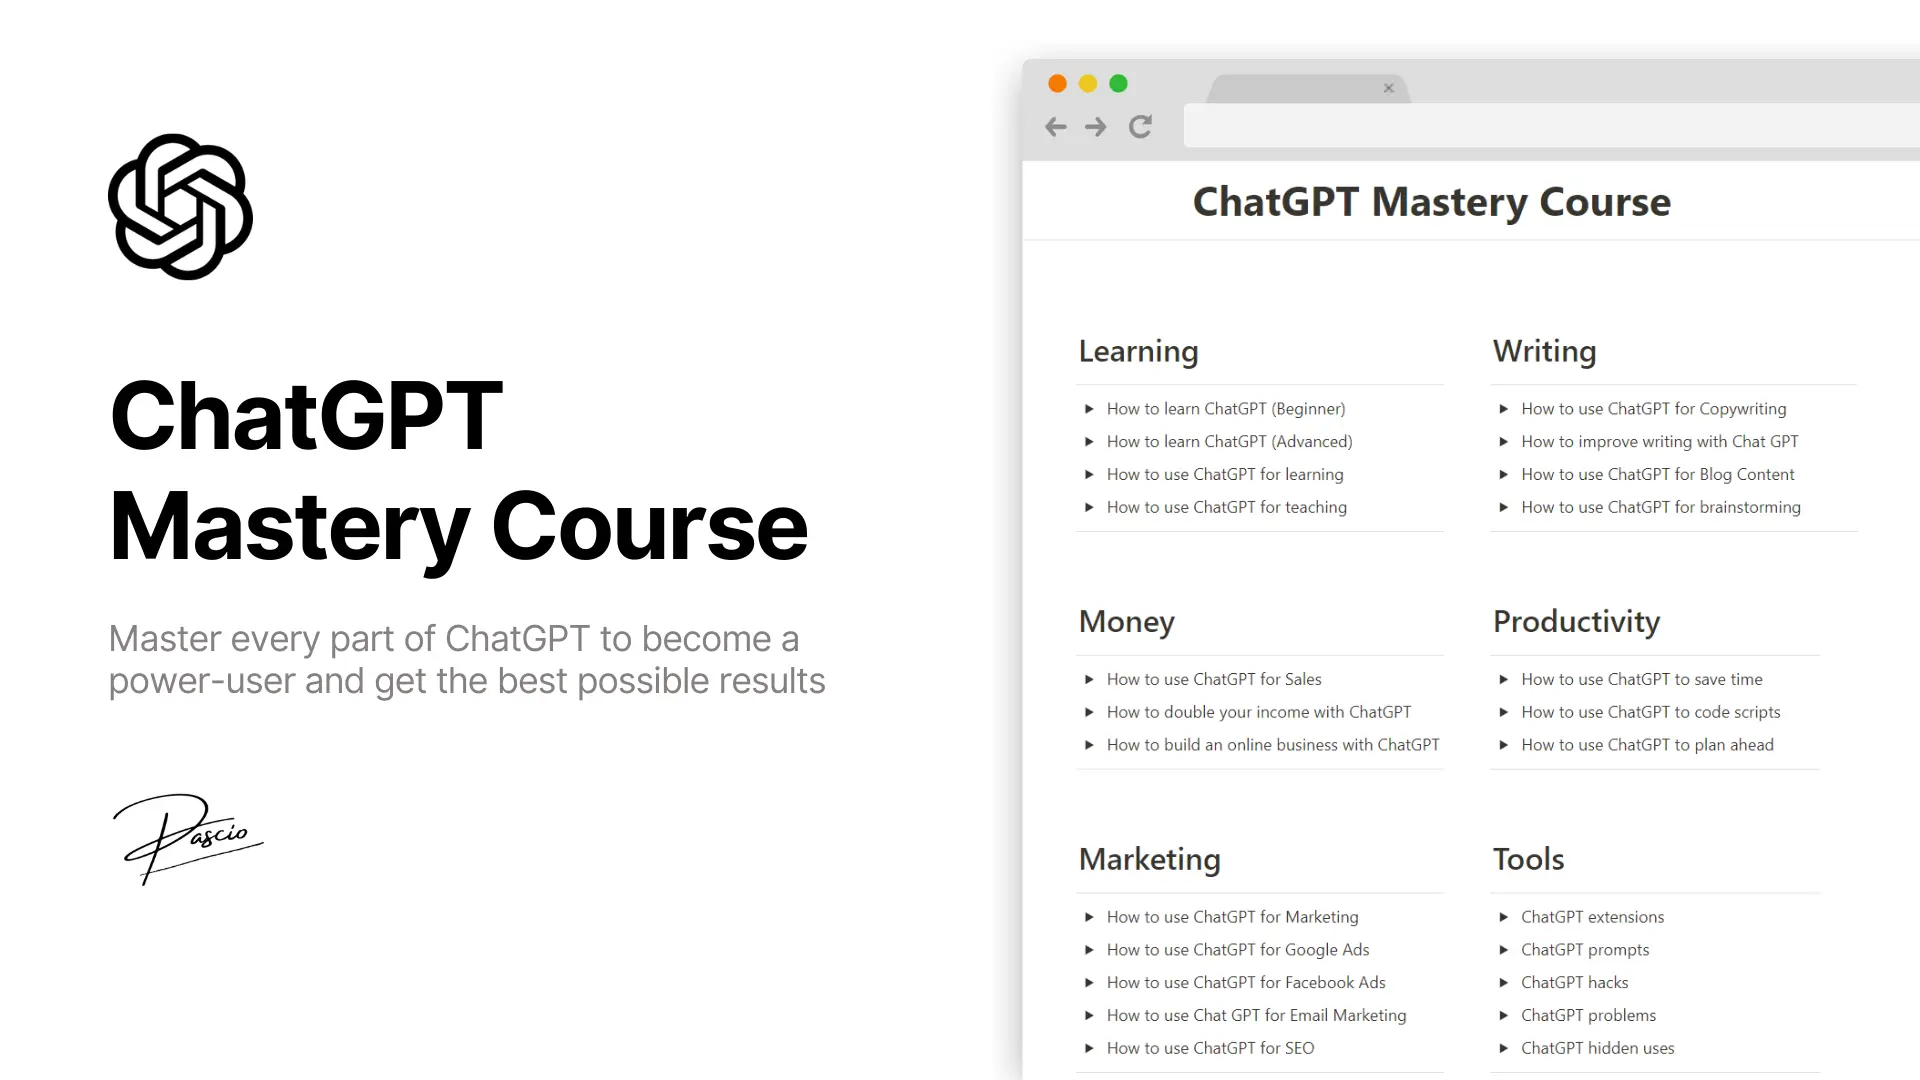 ChatGPT Mastery Course image